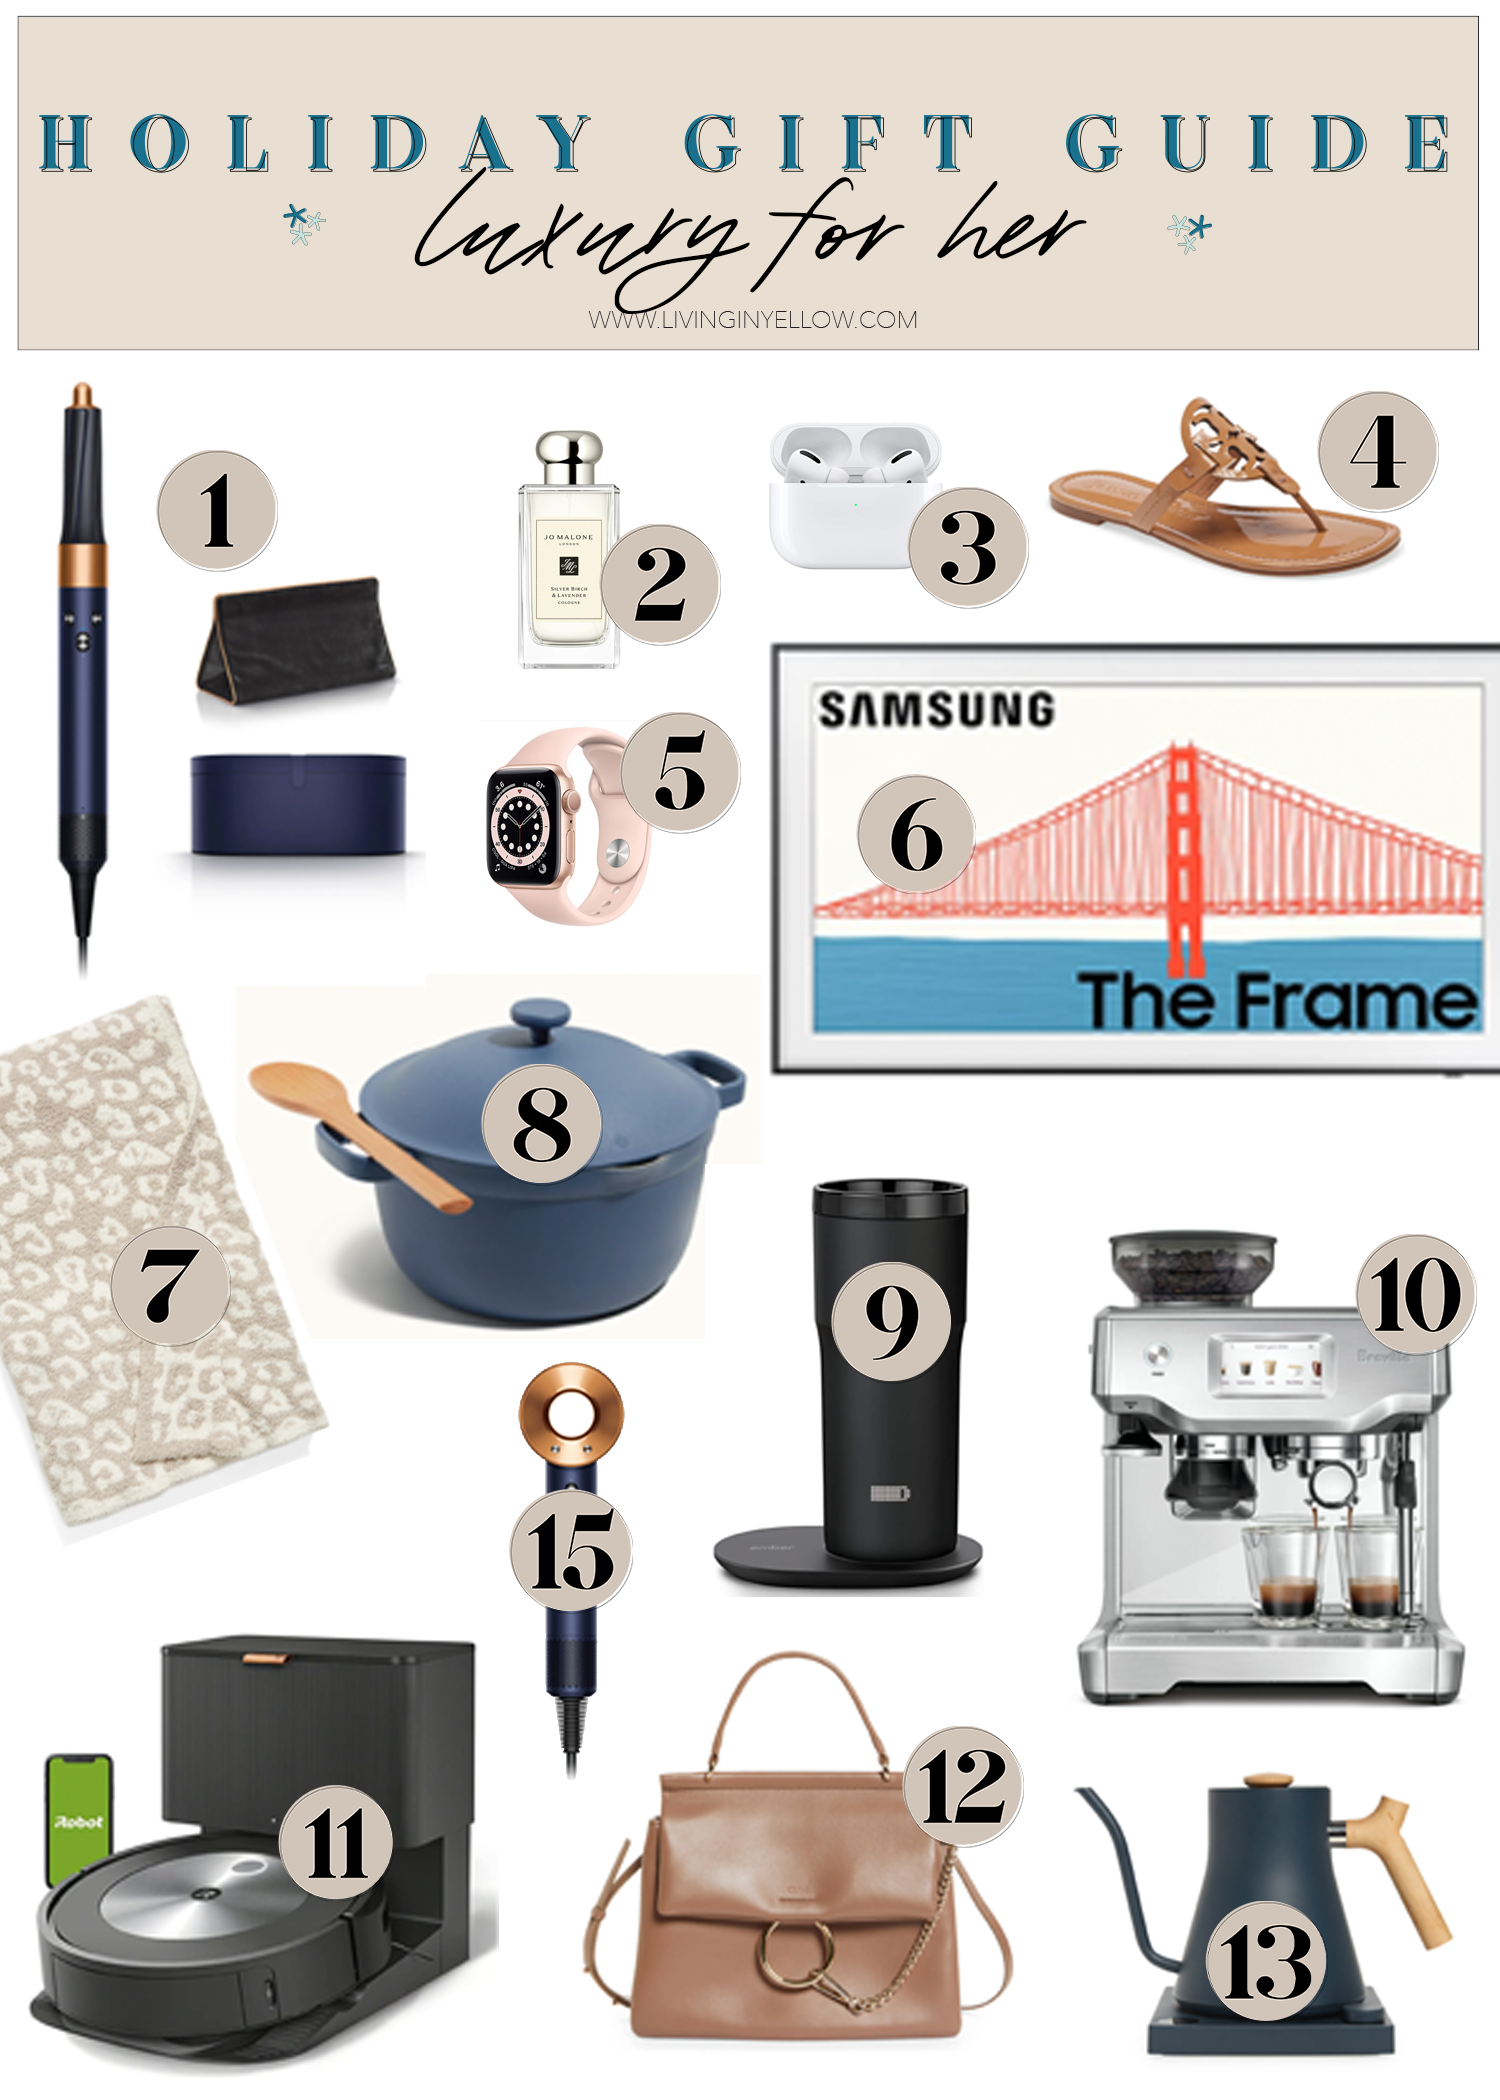 Luxury Christmas gifts for her: Christmas Gift Guide 2022